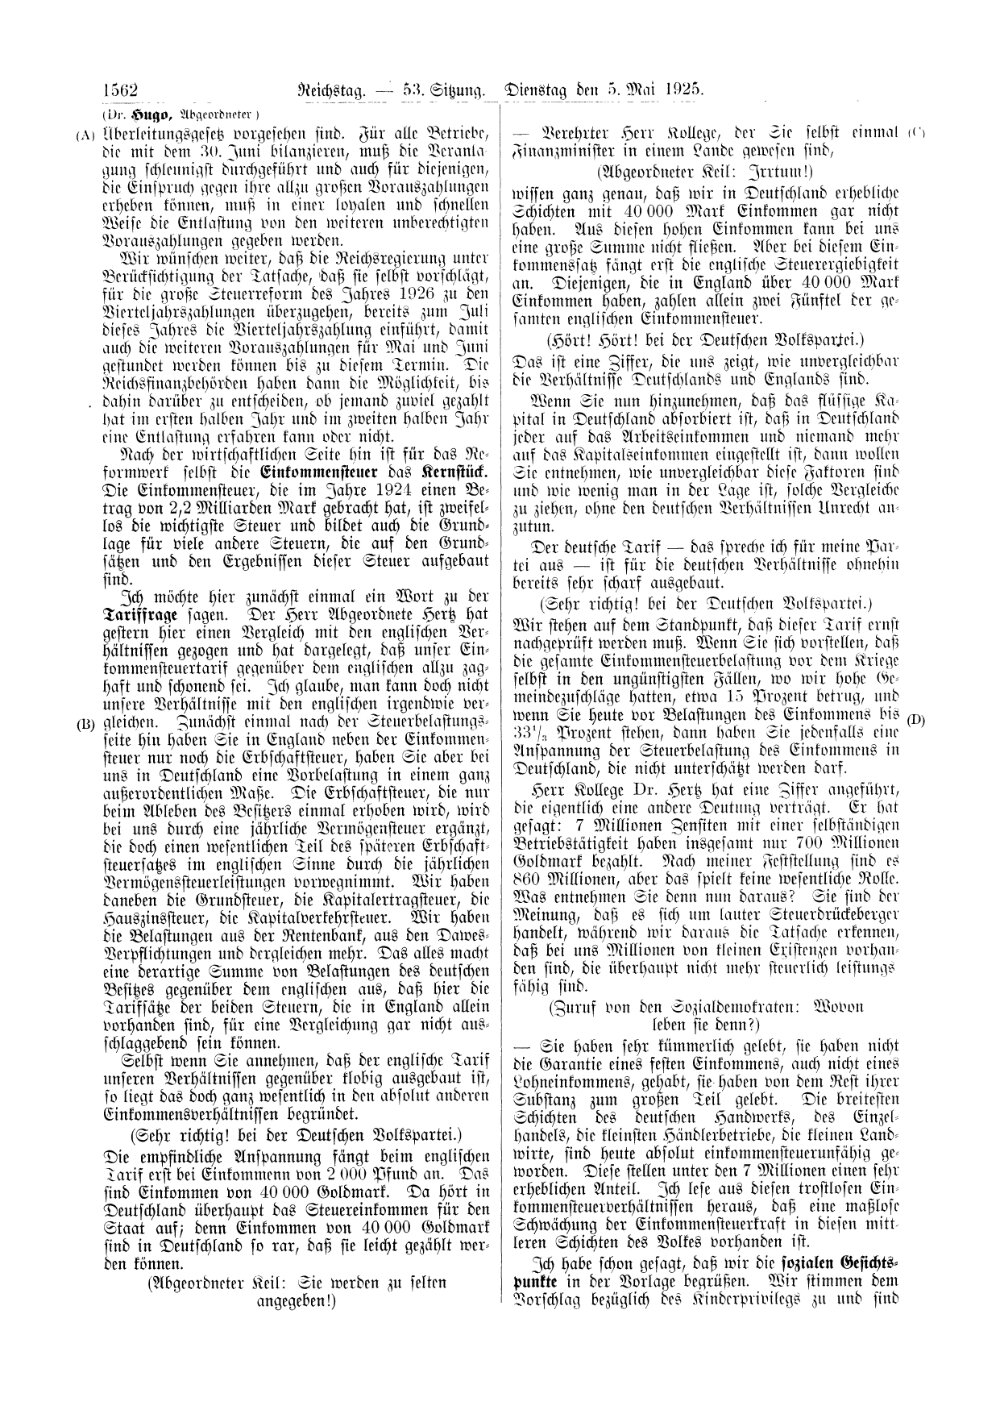 Scan of page 1562